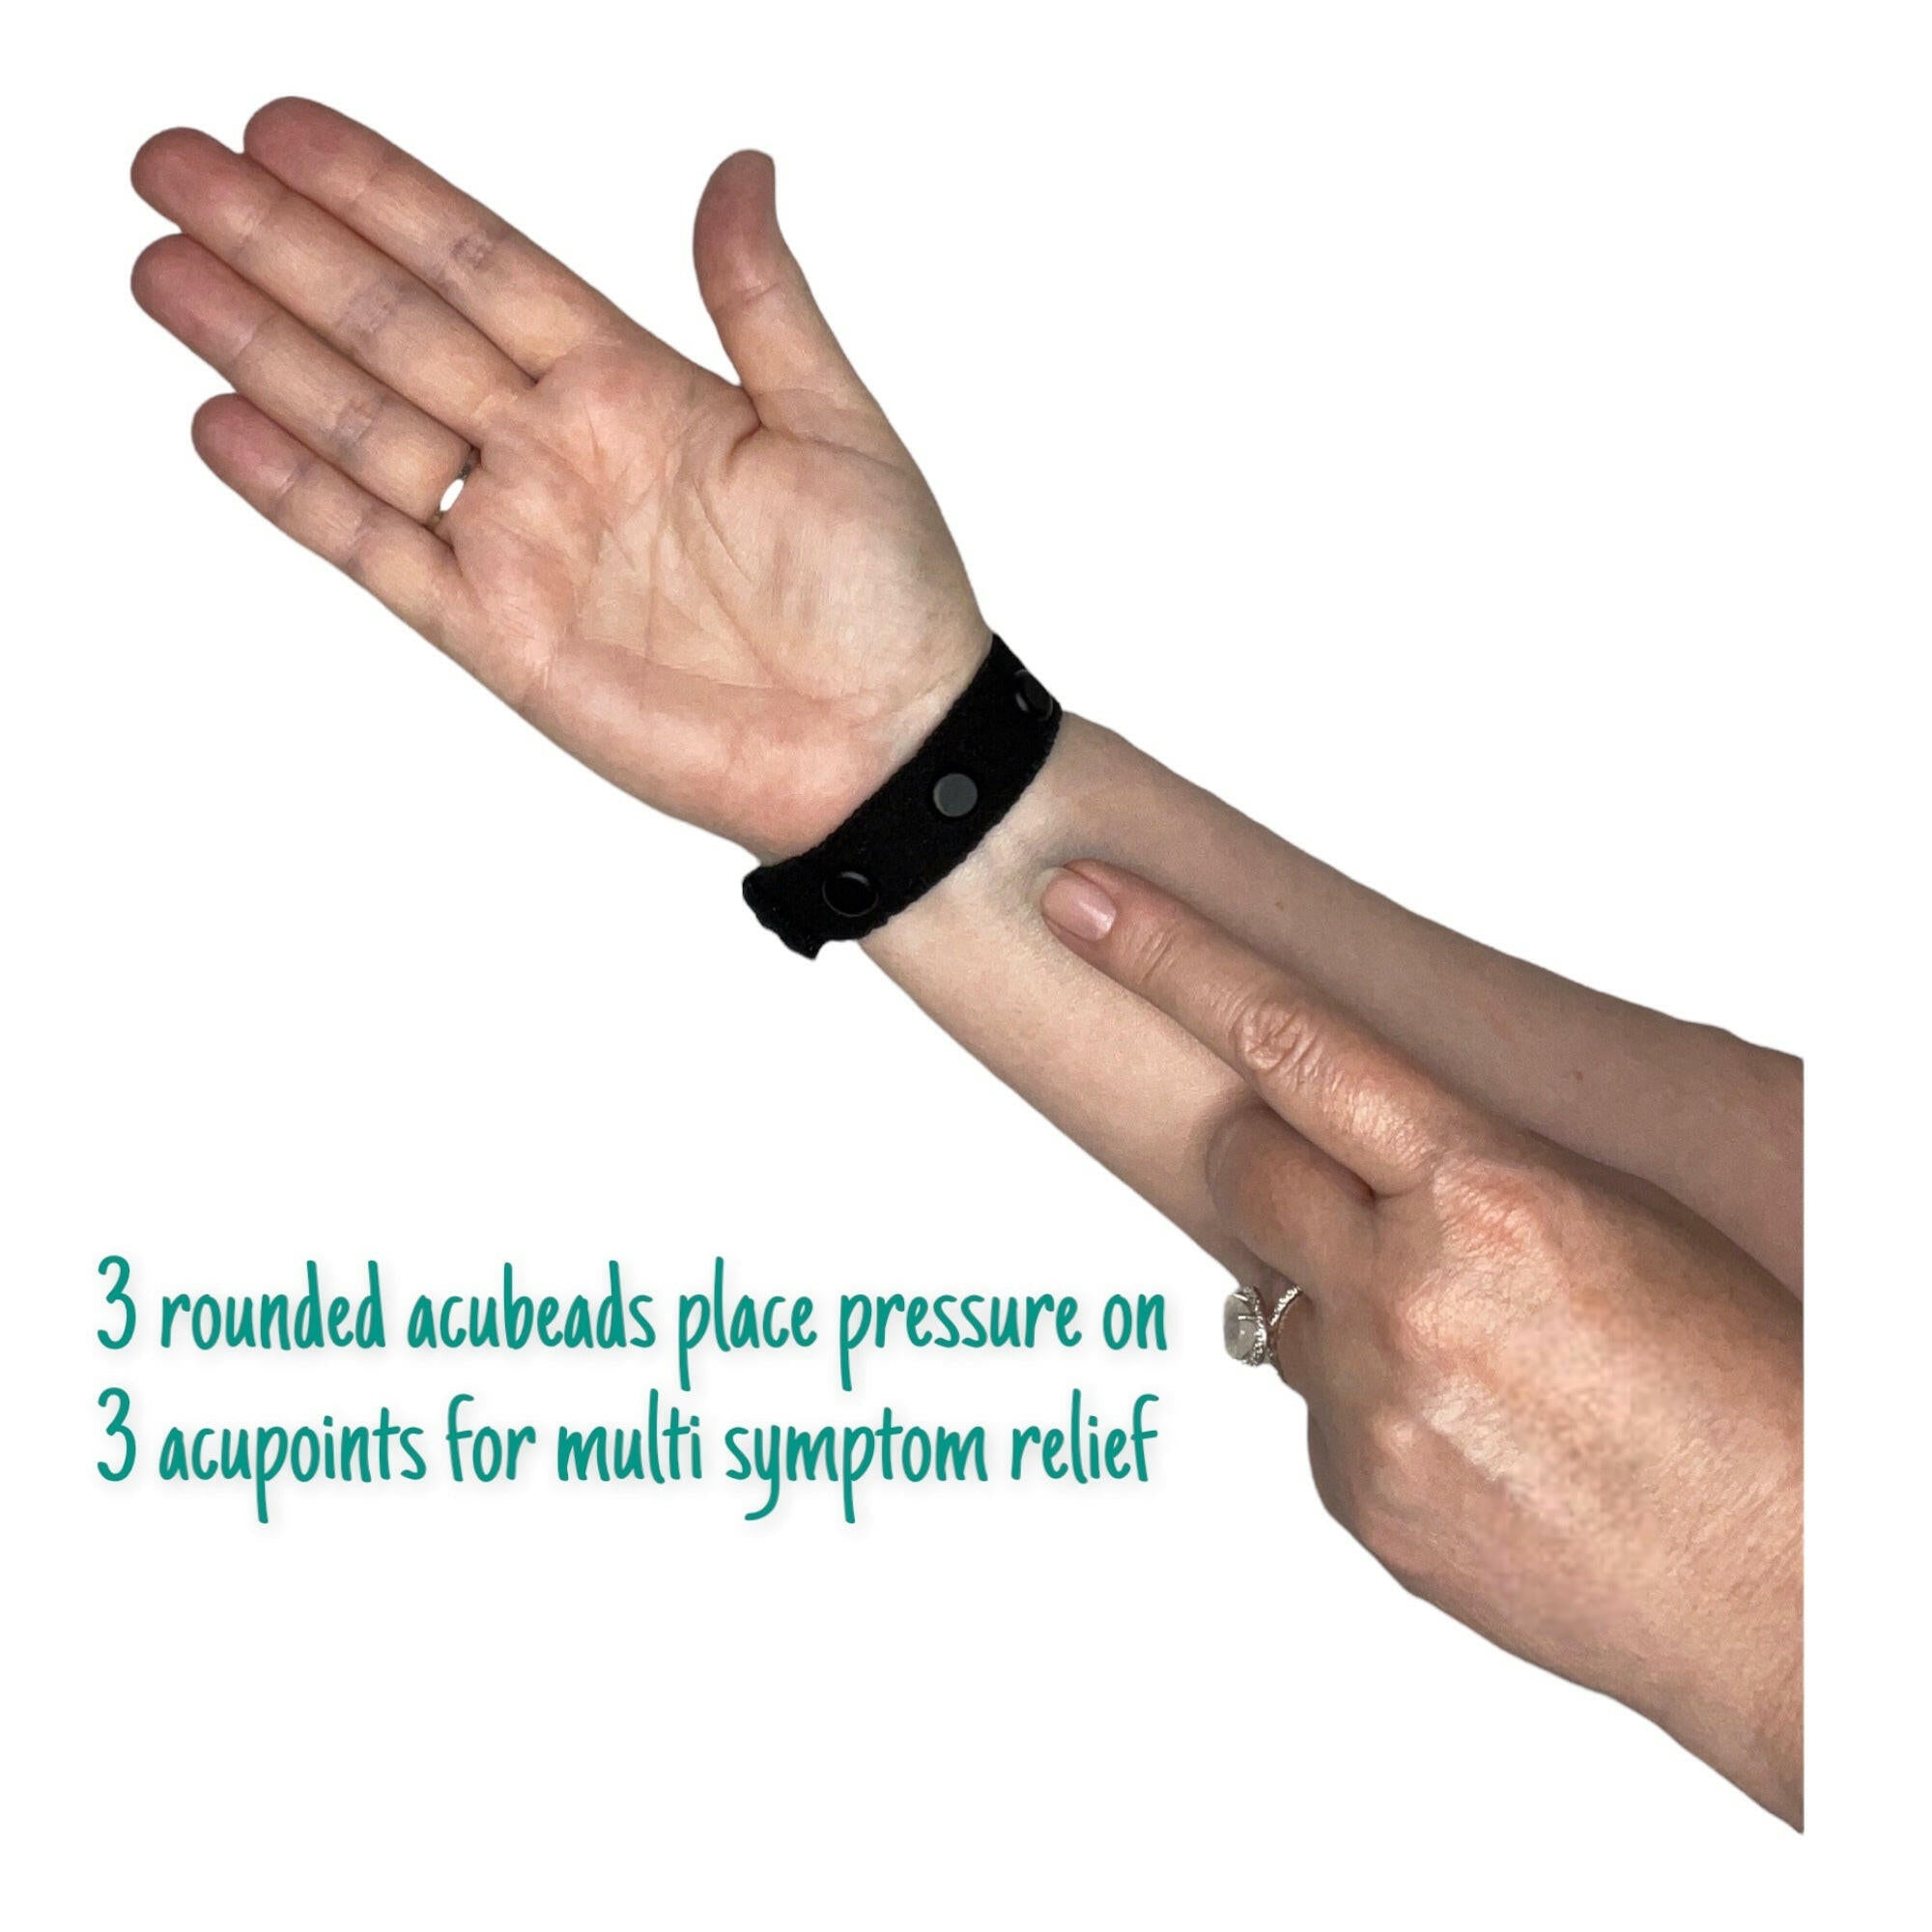 Anxiety Accupressure  Sea Bands Do They Work  Organics